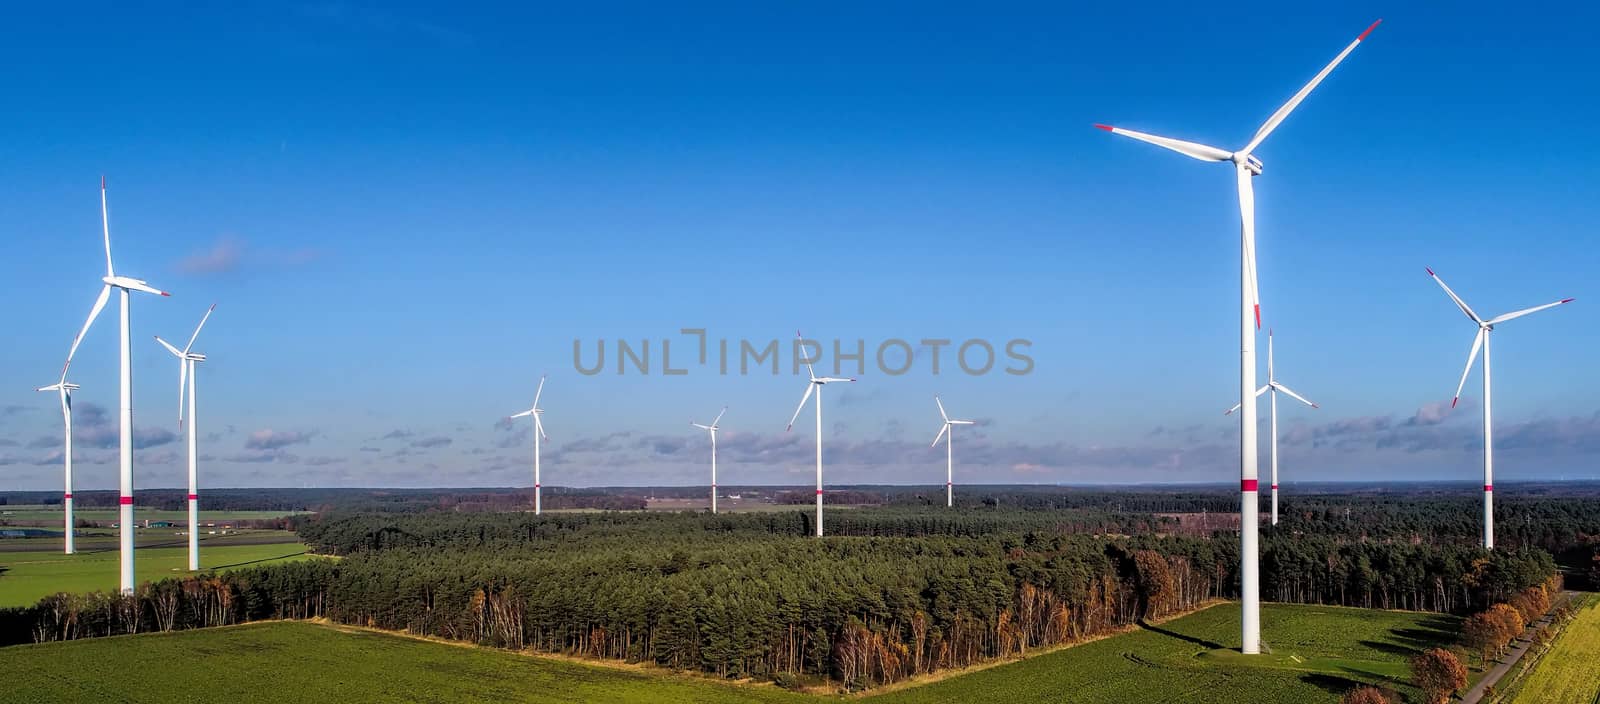 Wind farm in the Heide, aerial view with bright blue sky, near Uelzen, Germany, with plenty of space above